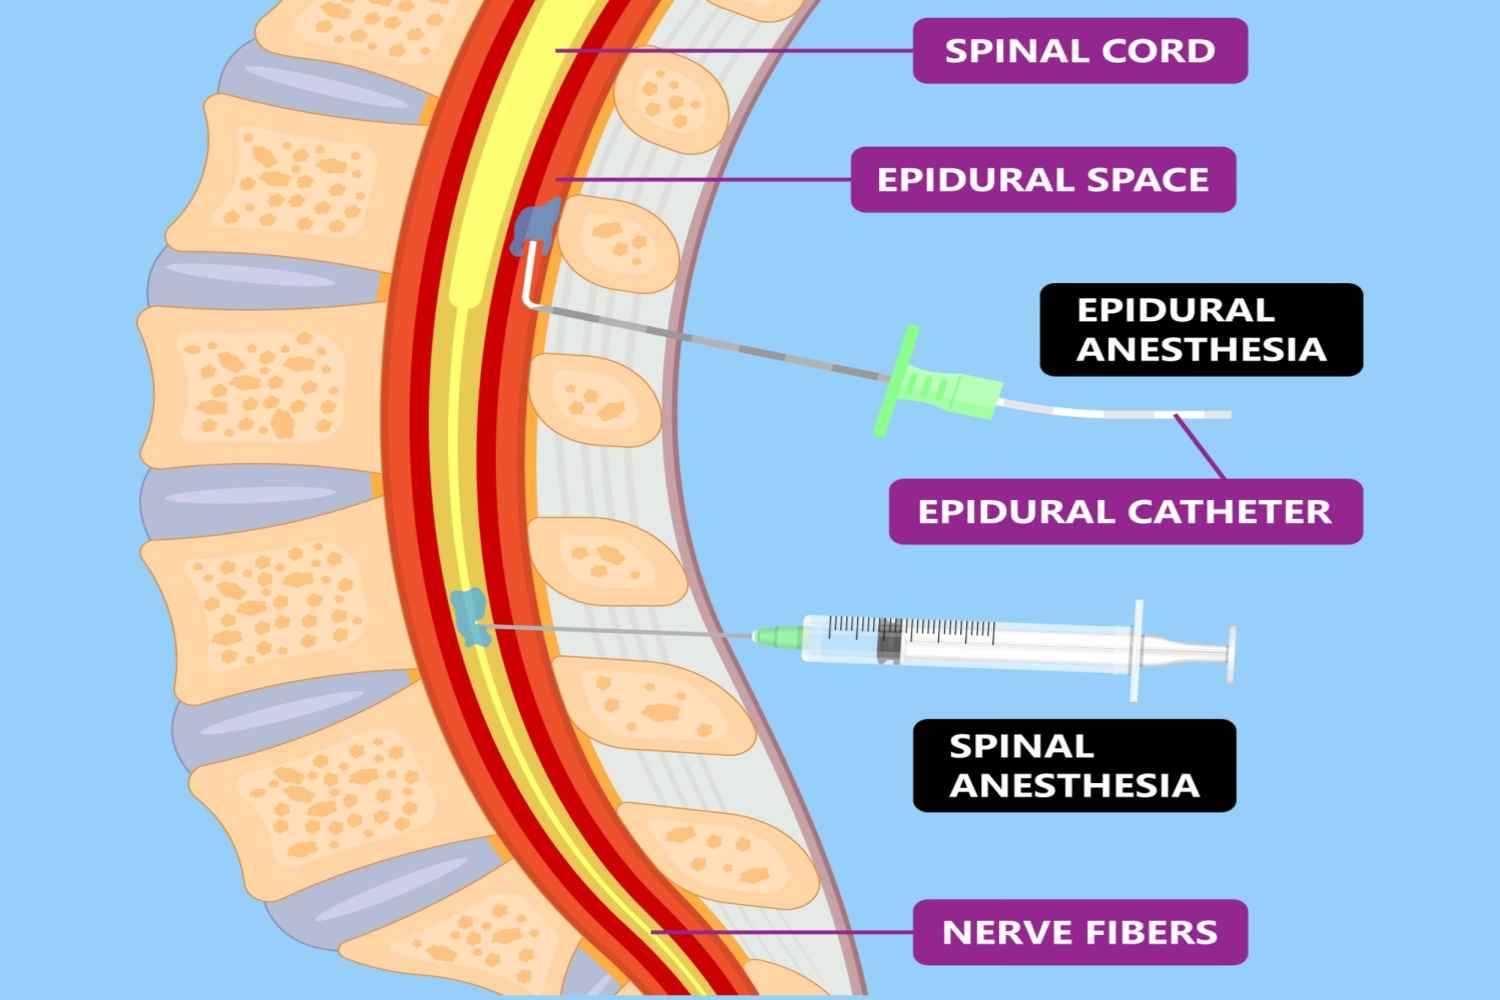 How Does an Epidural Work